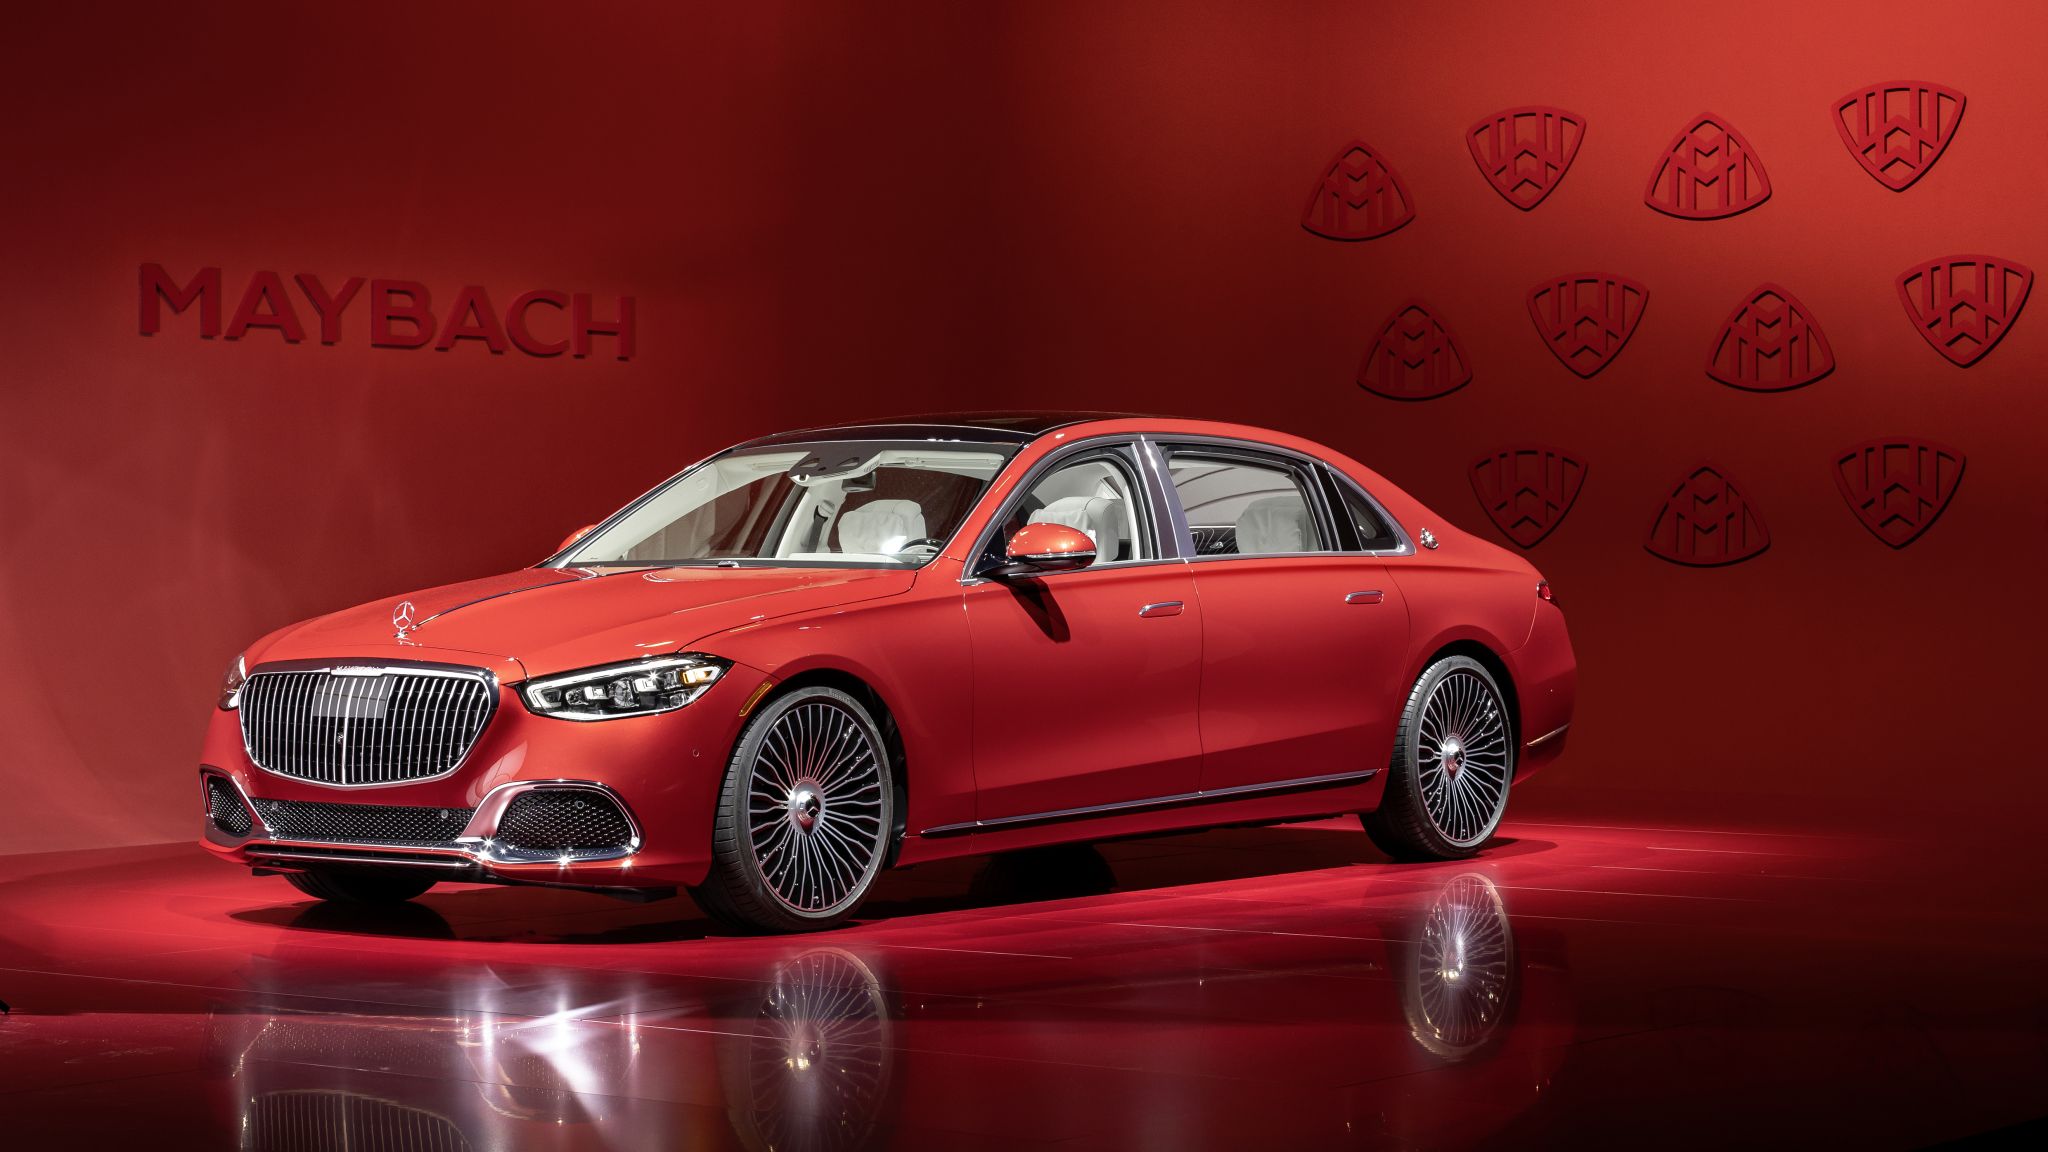 The Mercedes-Maybach S-Class is the New Definition of Luxury